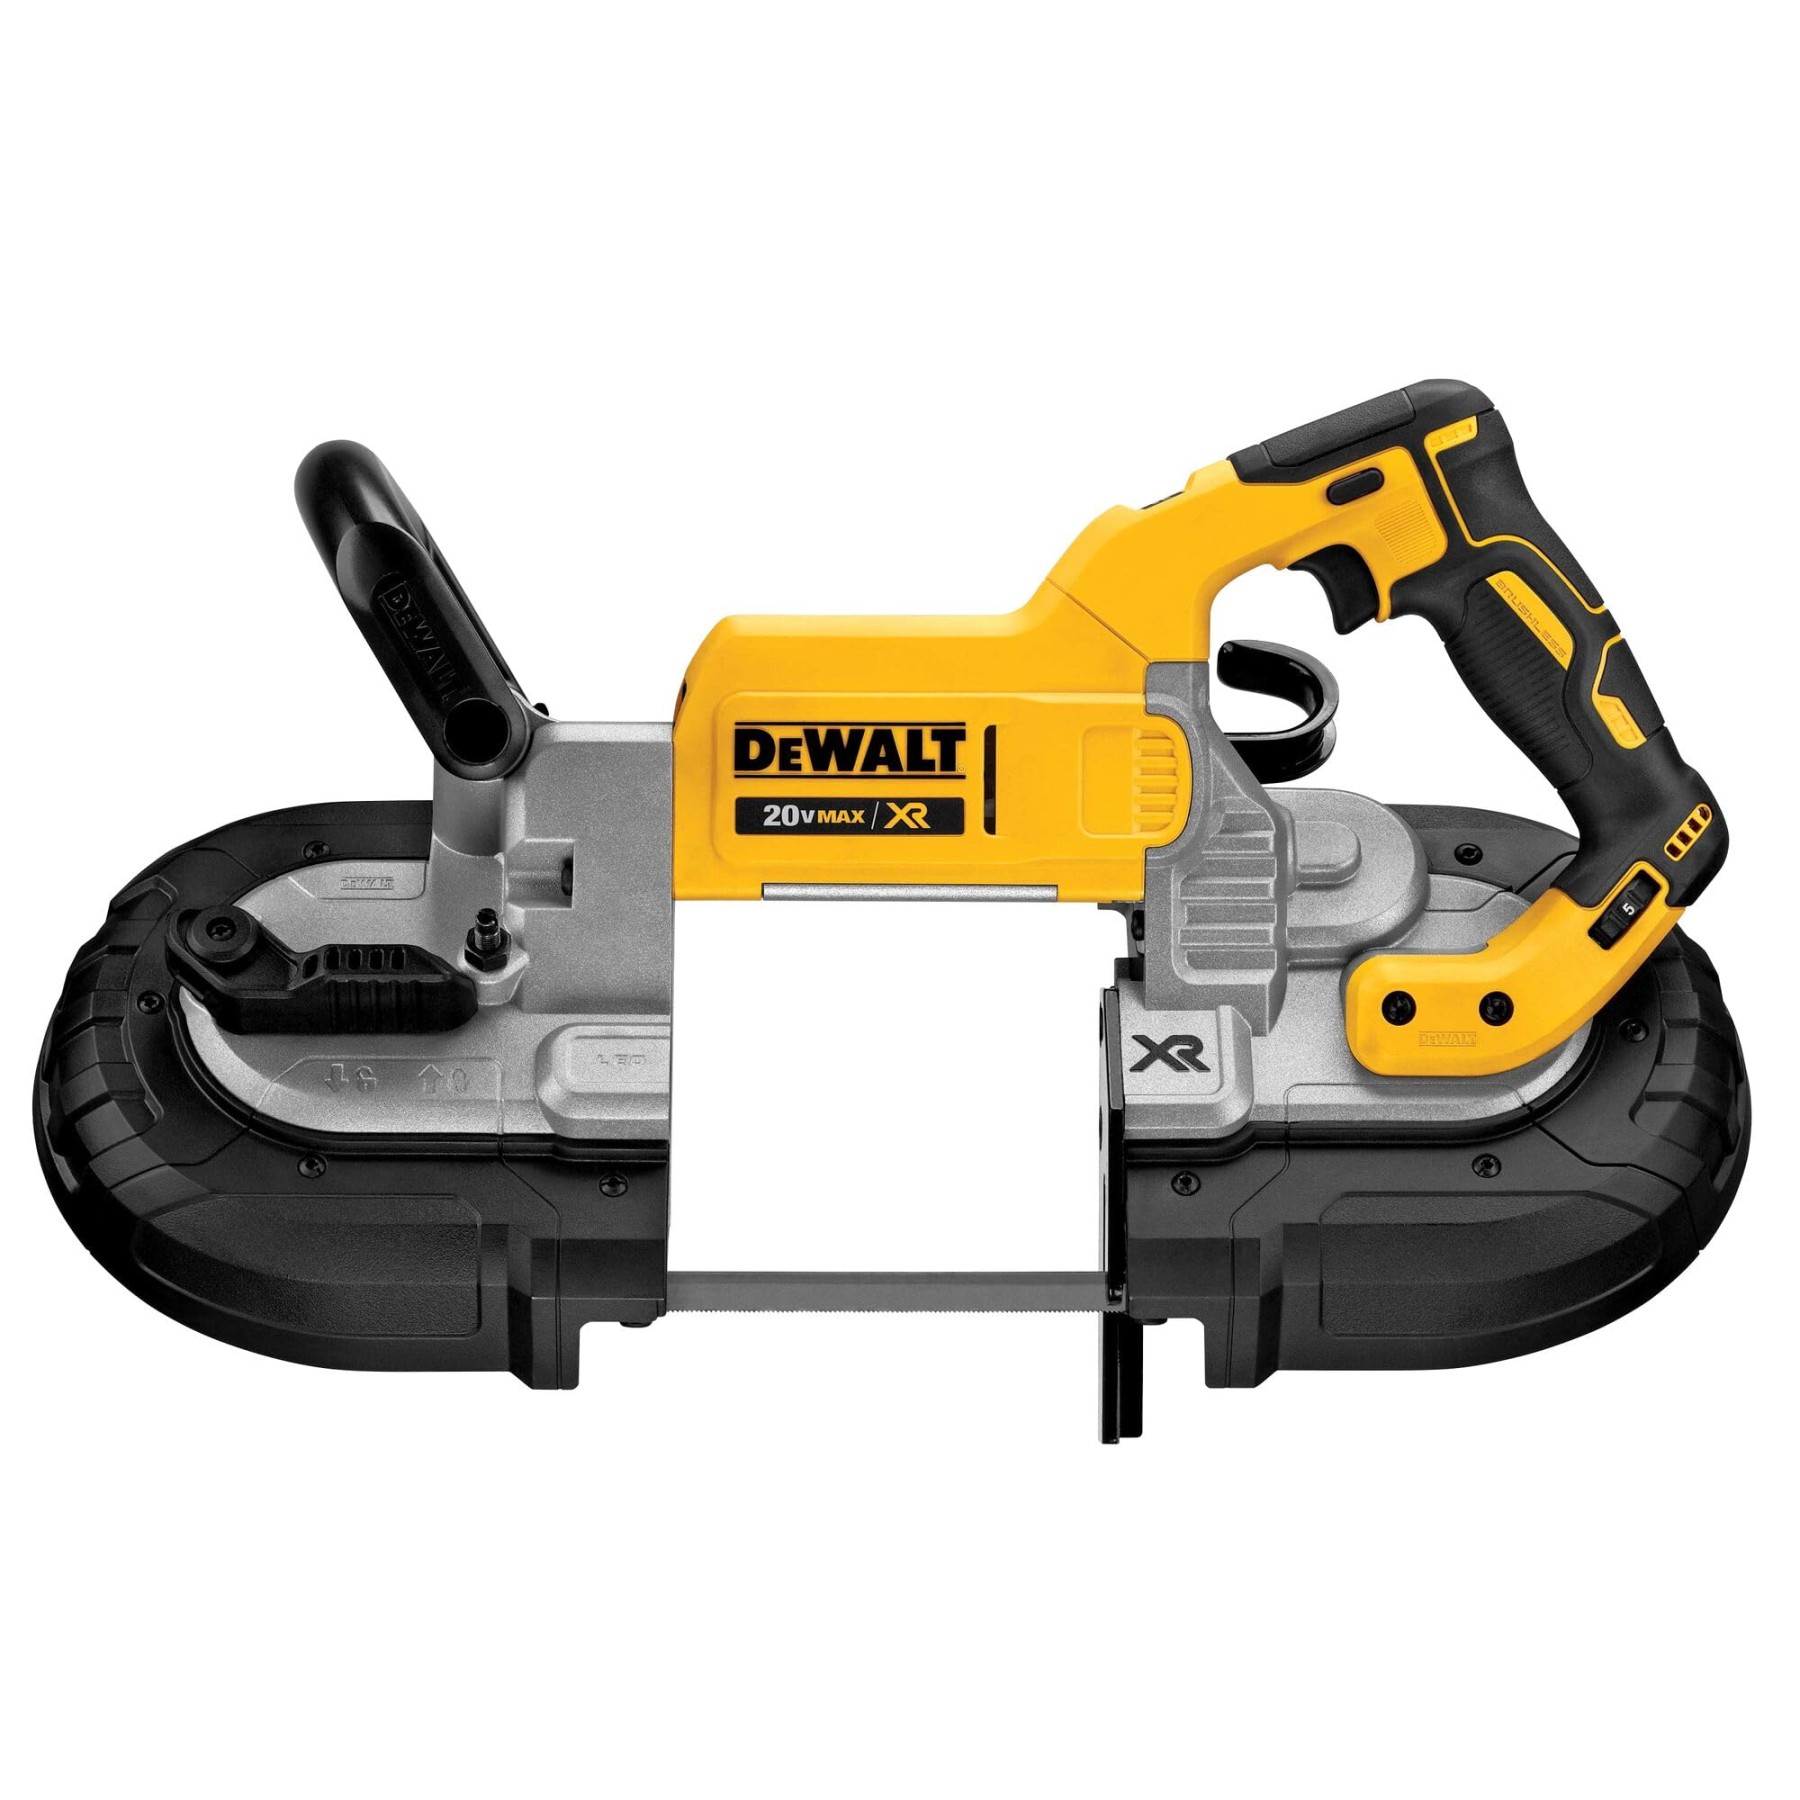 dewalt-v-max-portable-band-saw-deep-cut-tool-only-dcsb DeWalt Portable Band Saw Review: Cutting Through The Competition picture